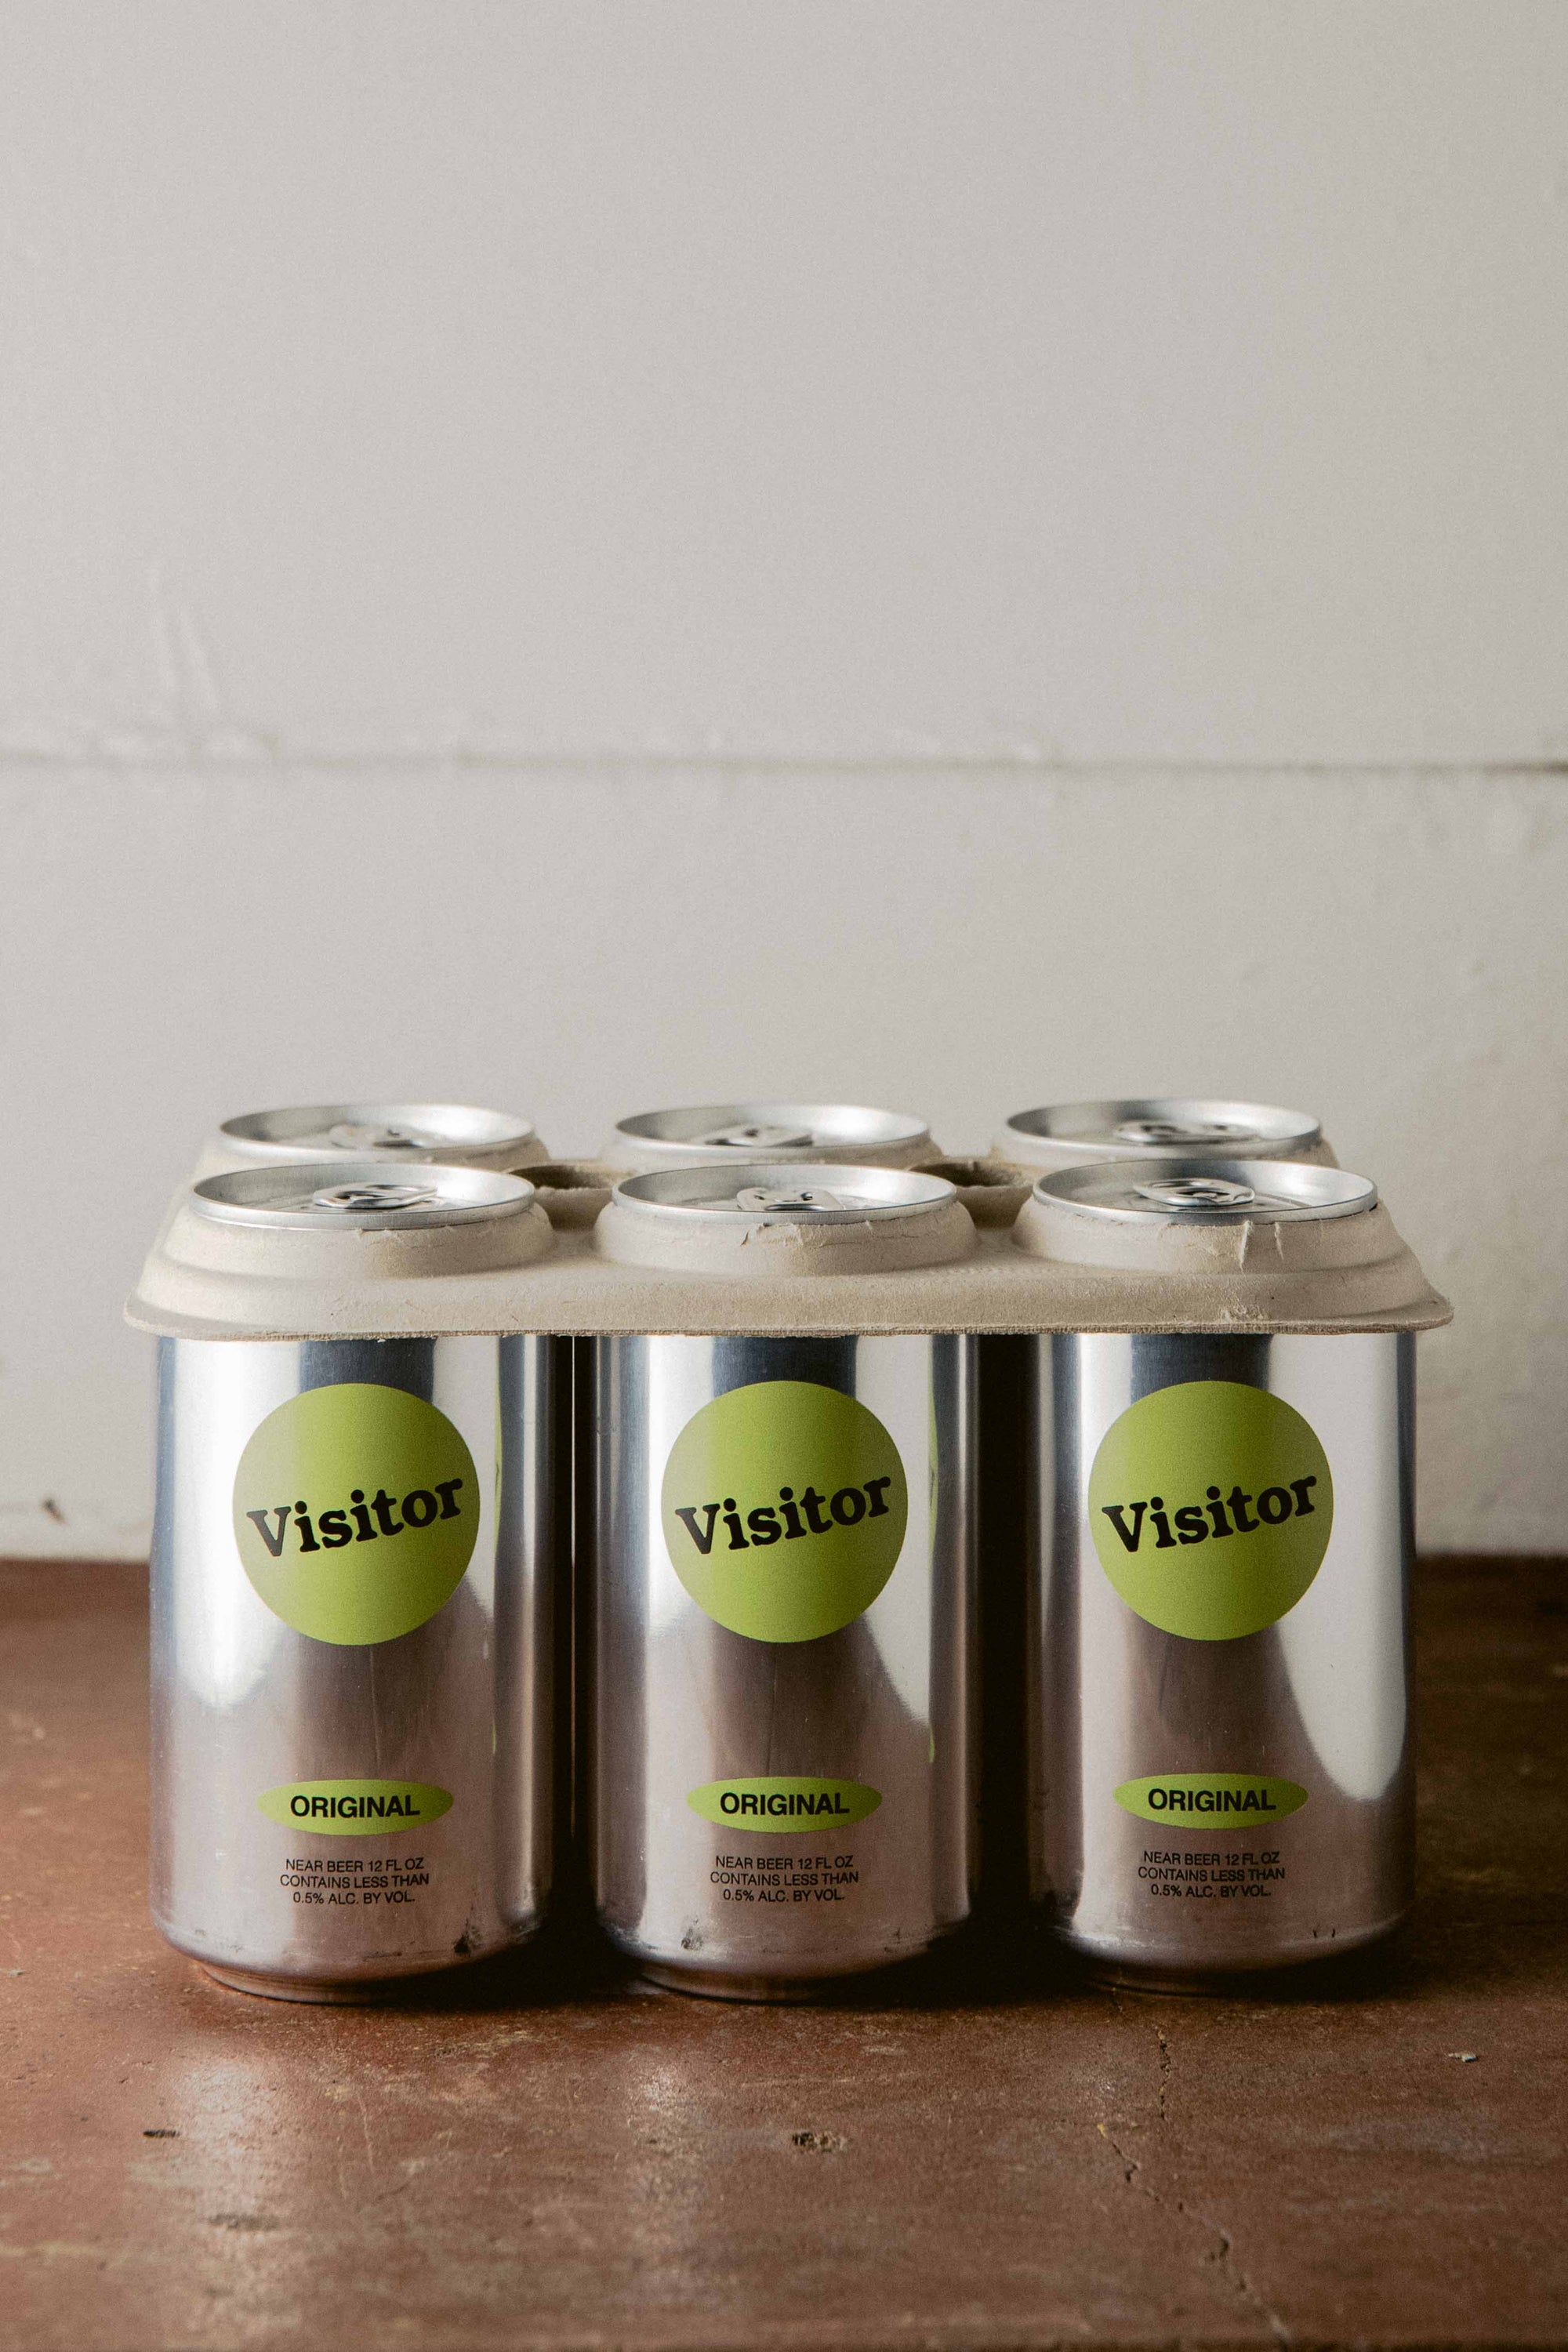 Visitor Non Alcoholic "Near-Beer" Lager